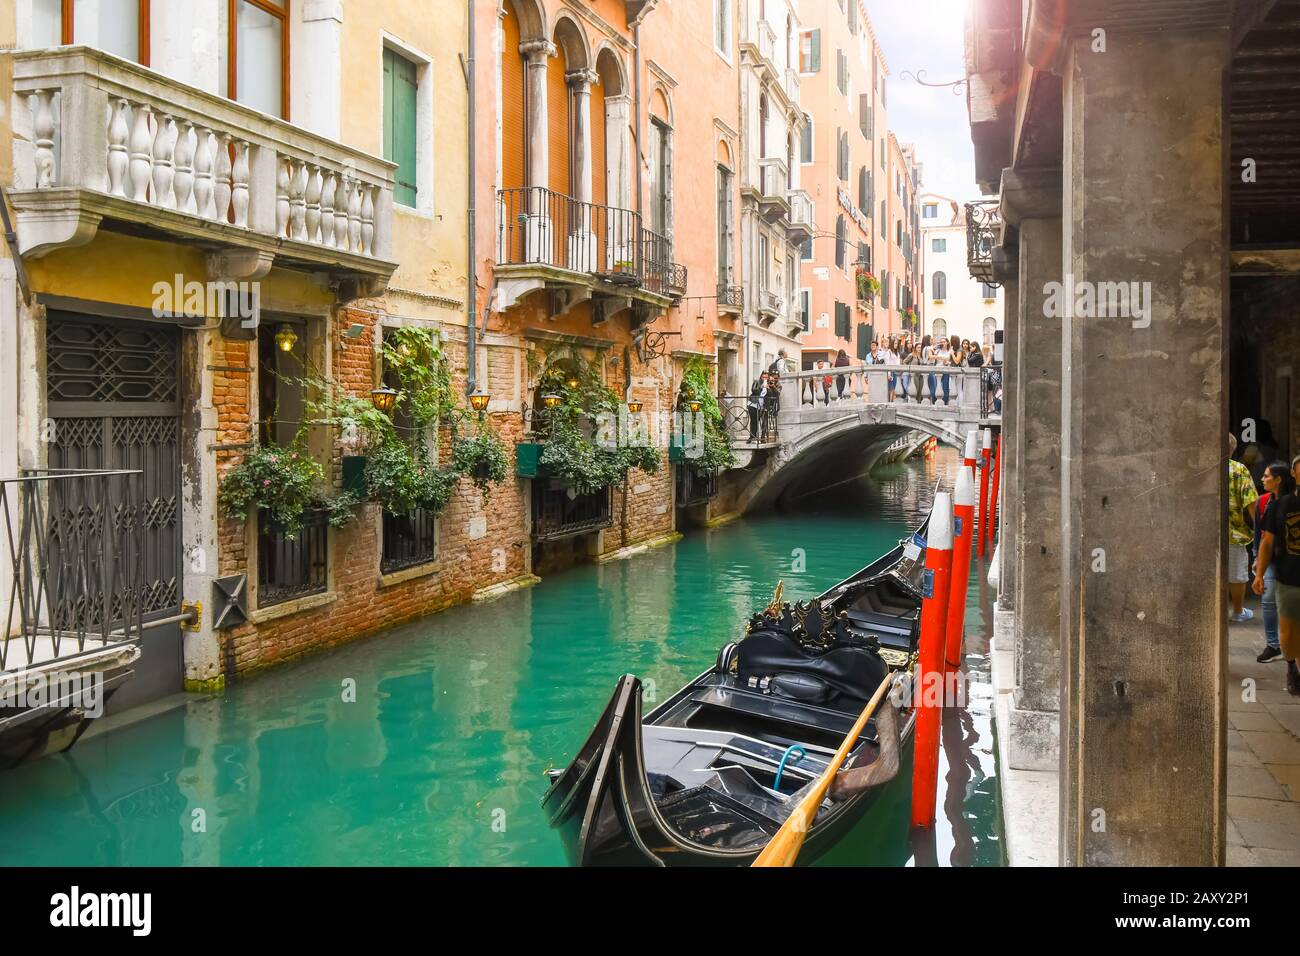 Tourists cross a bridge over a small canal with a gondola parked in the historic center of Venice Italy. Stock Photo